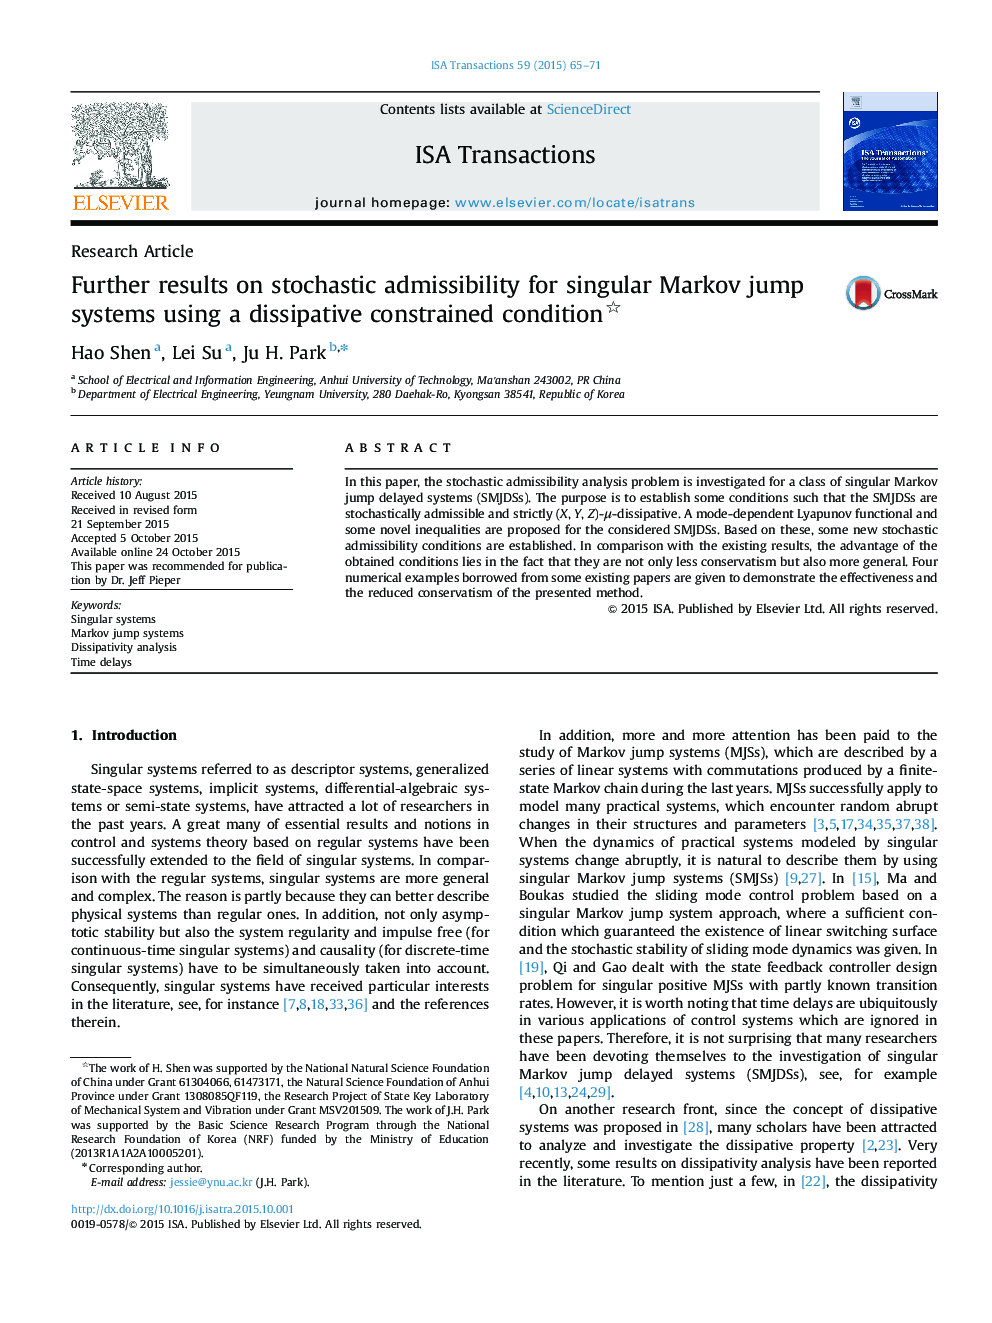 Research ArticleFurther results on stochastic admissibility for singular Markov jump systems using a dissipative constrained condition